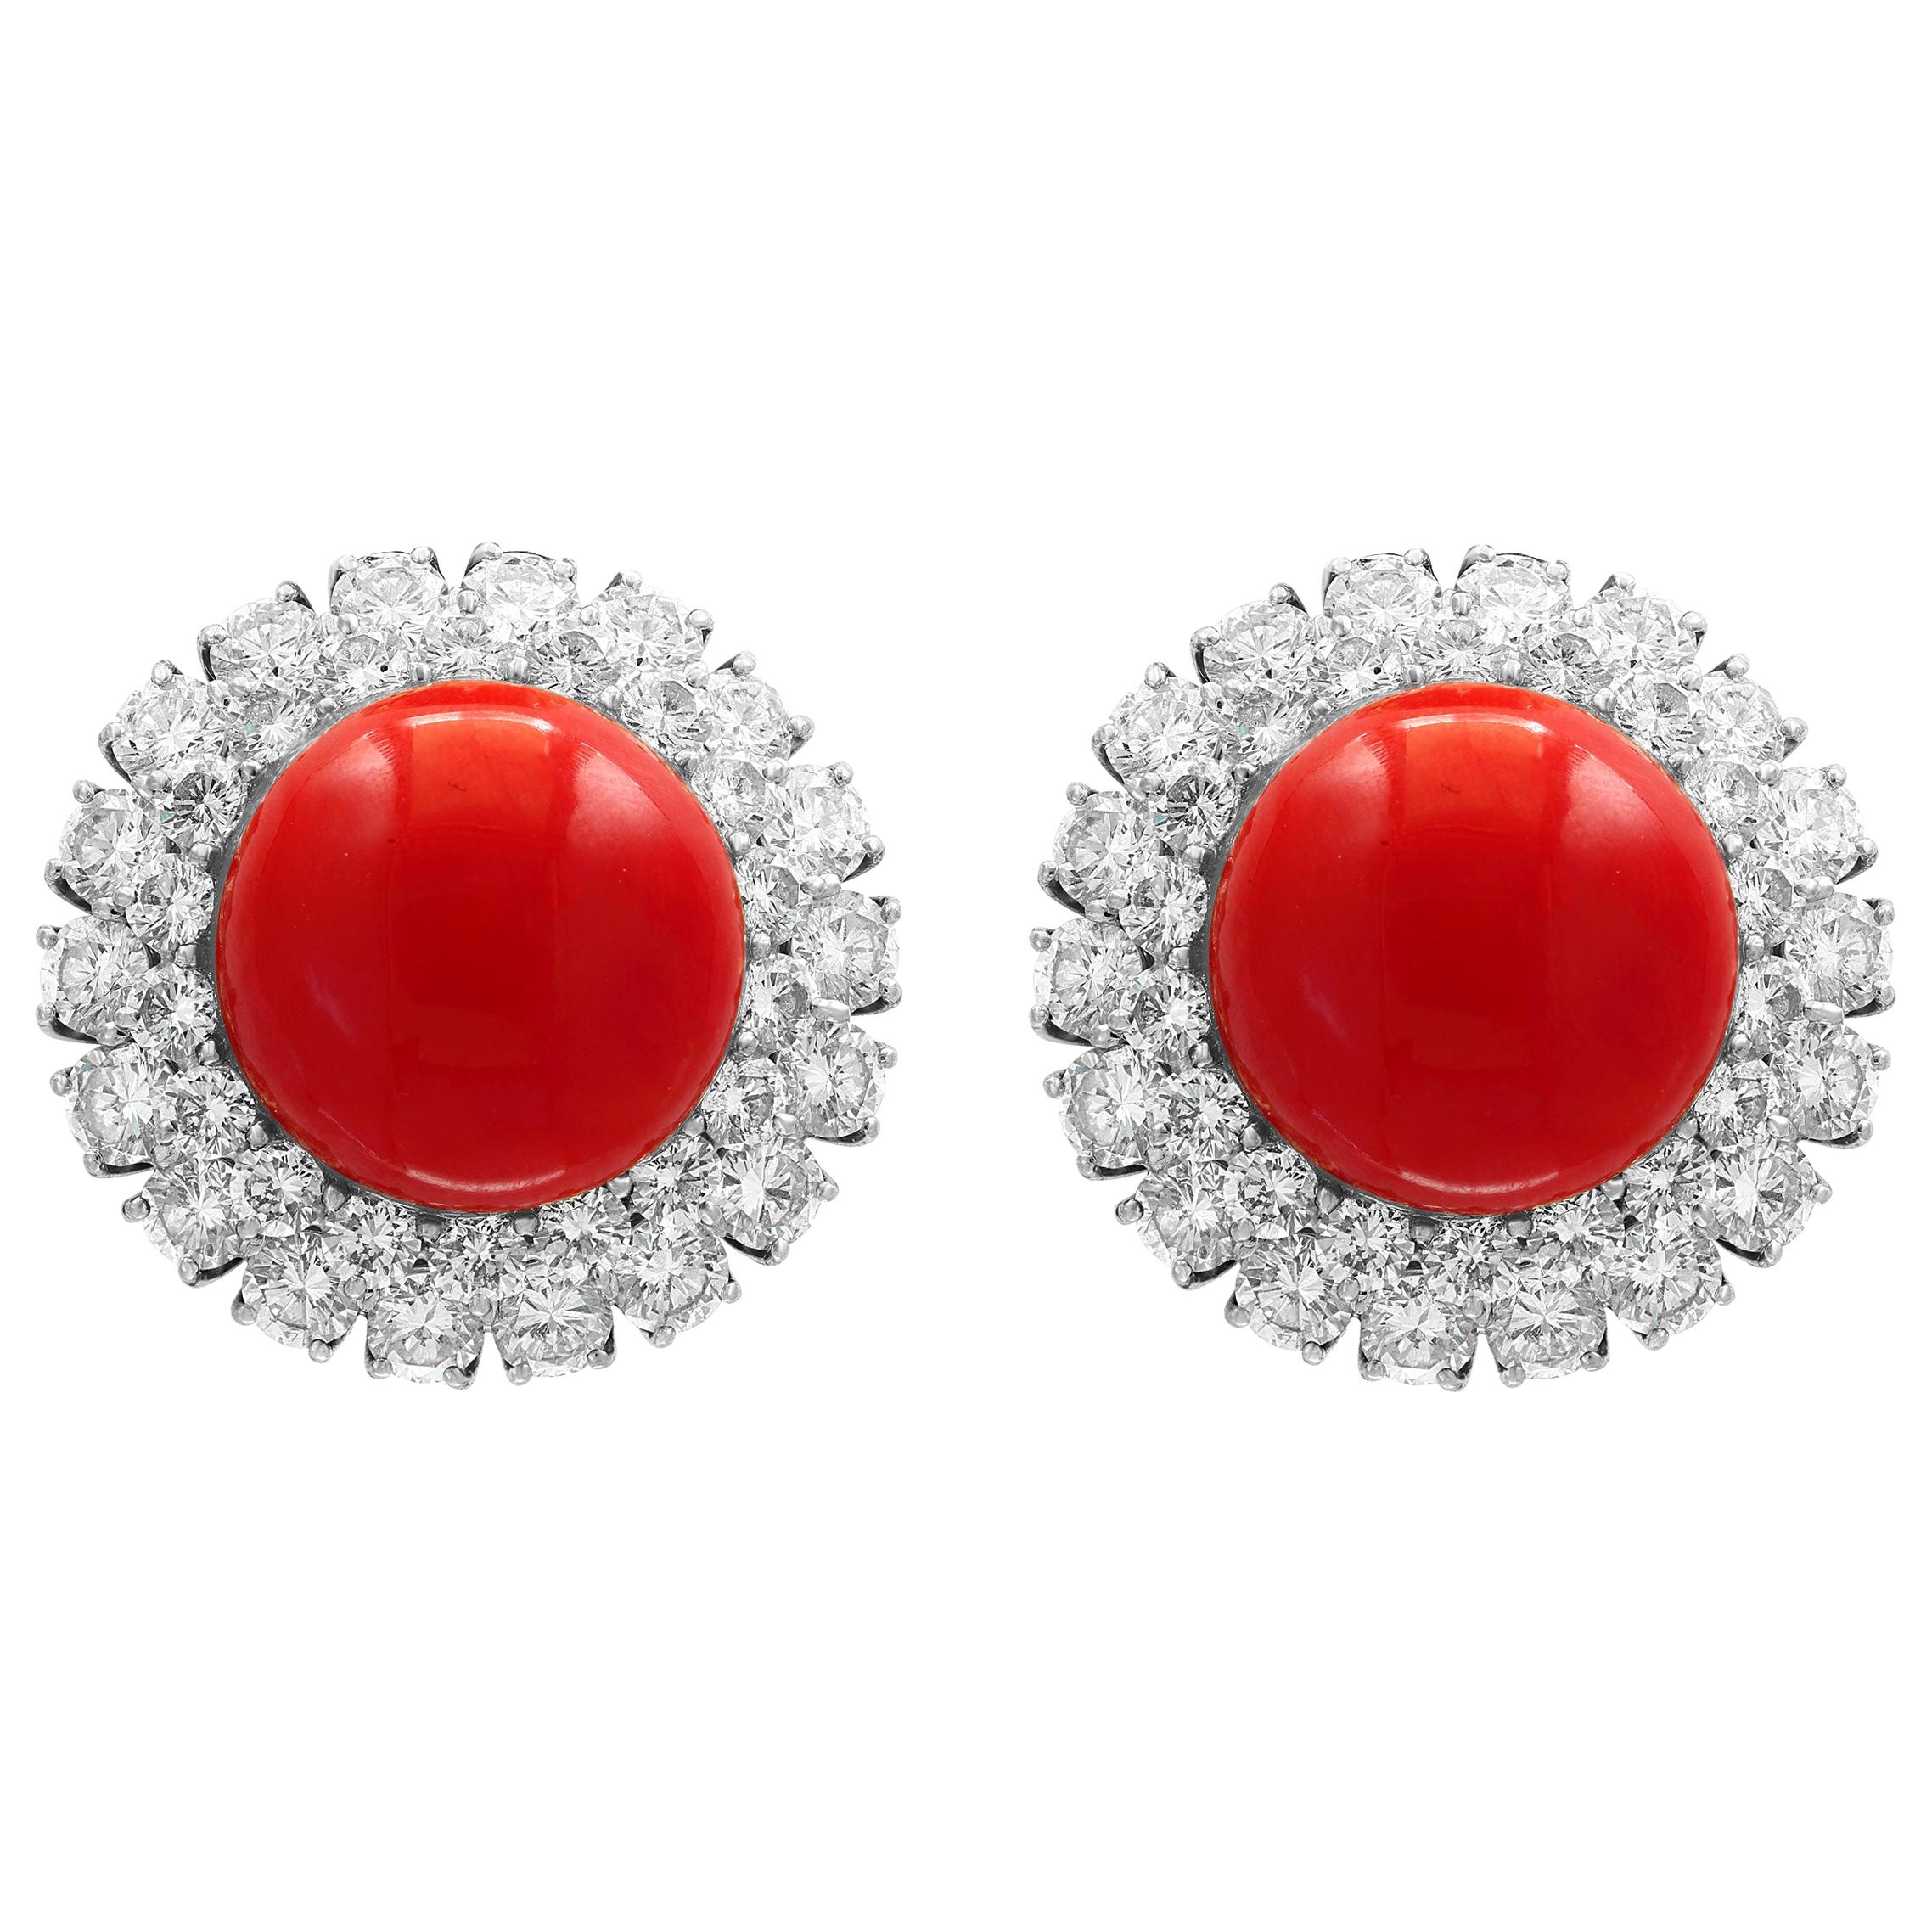 35 Carat Natural Coral and 12 Carat DeBeers Diamond Cocktail Earring in Platinum